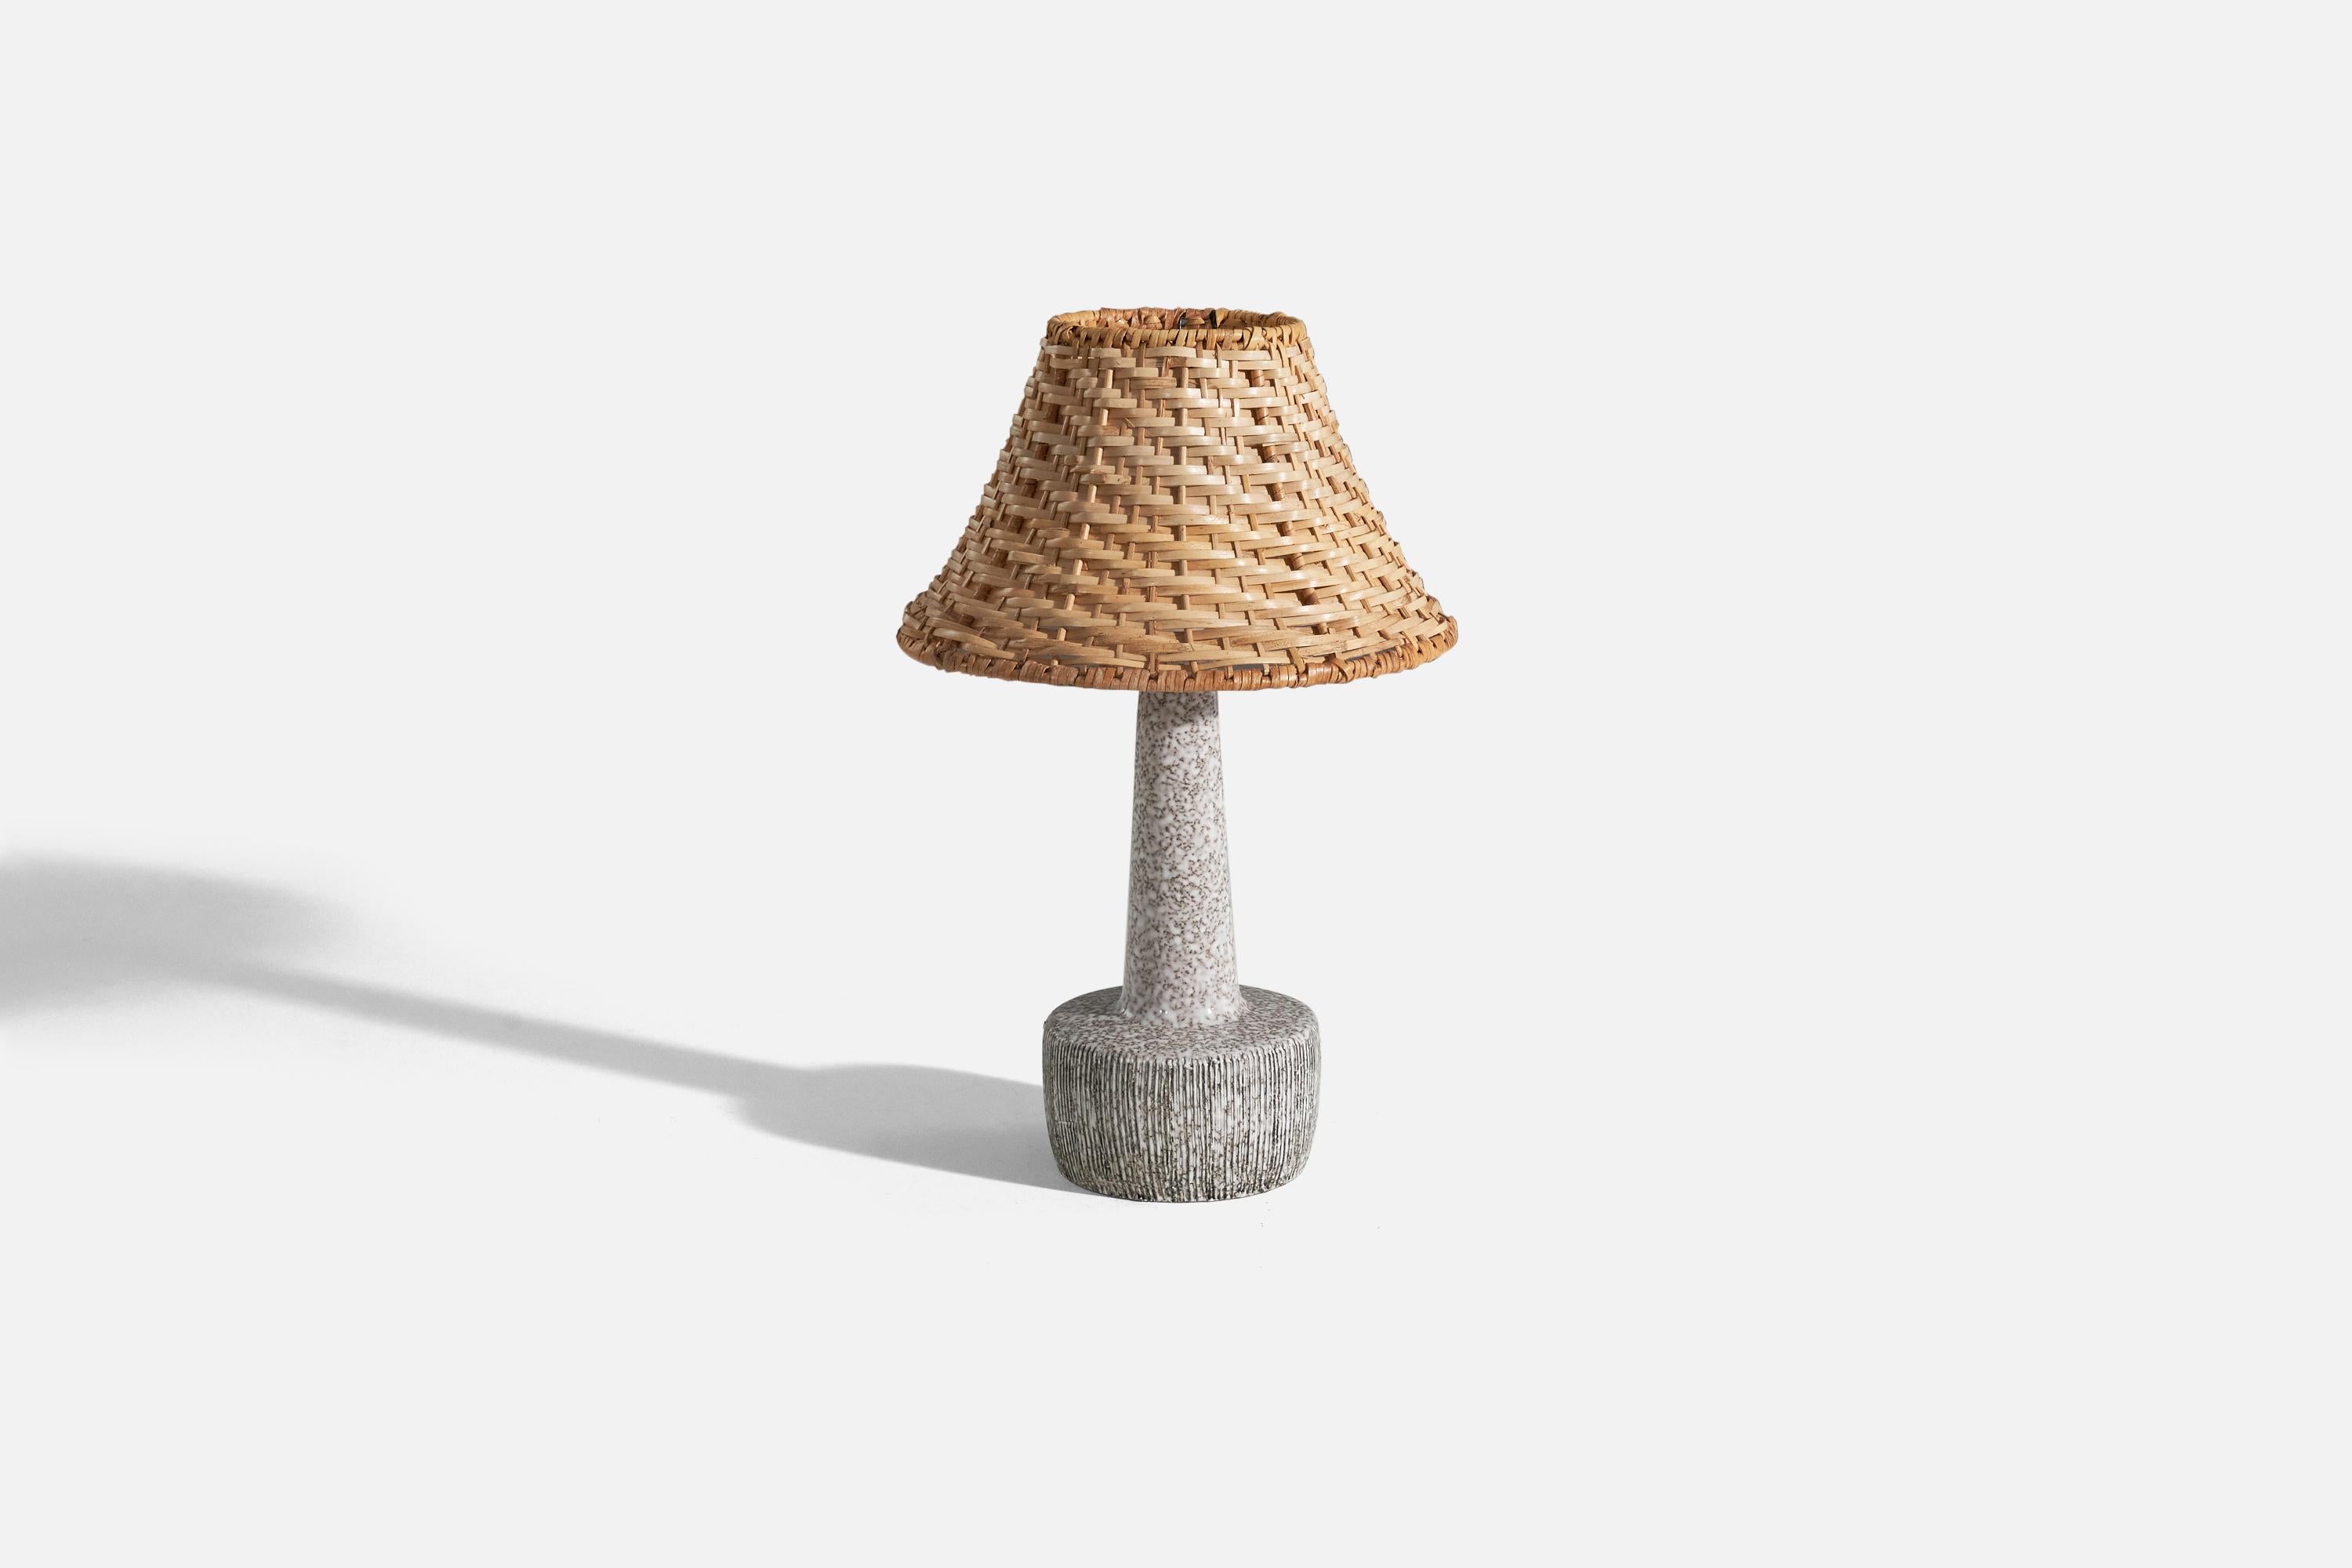 A pair of gray, glazed stoneware table lamp designed and produced by a Danish designer, Denmark, c. 1960s.

Sold with lampshades. 
Dimensions of lamp (inches) : 10.93 x 4.5 x 4.5 (Height x Width x Depth)
Dimensions of shade (inches) : 4 x 8.75 x